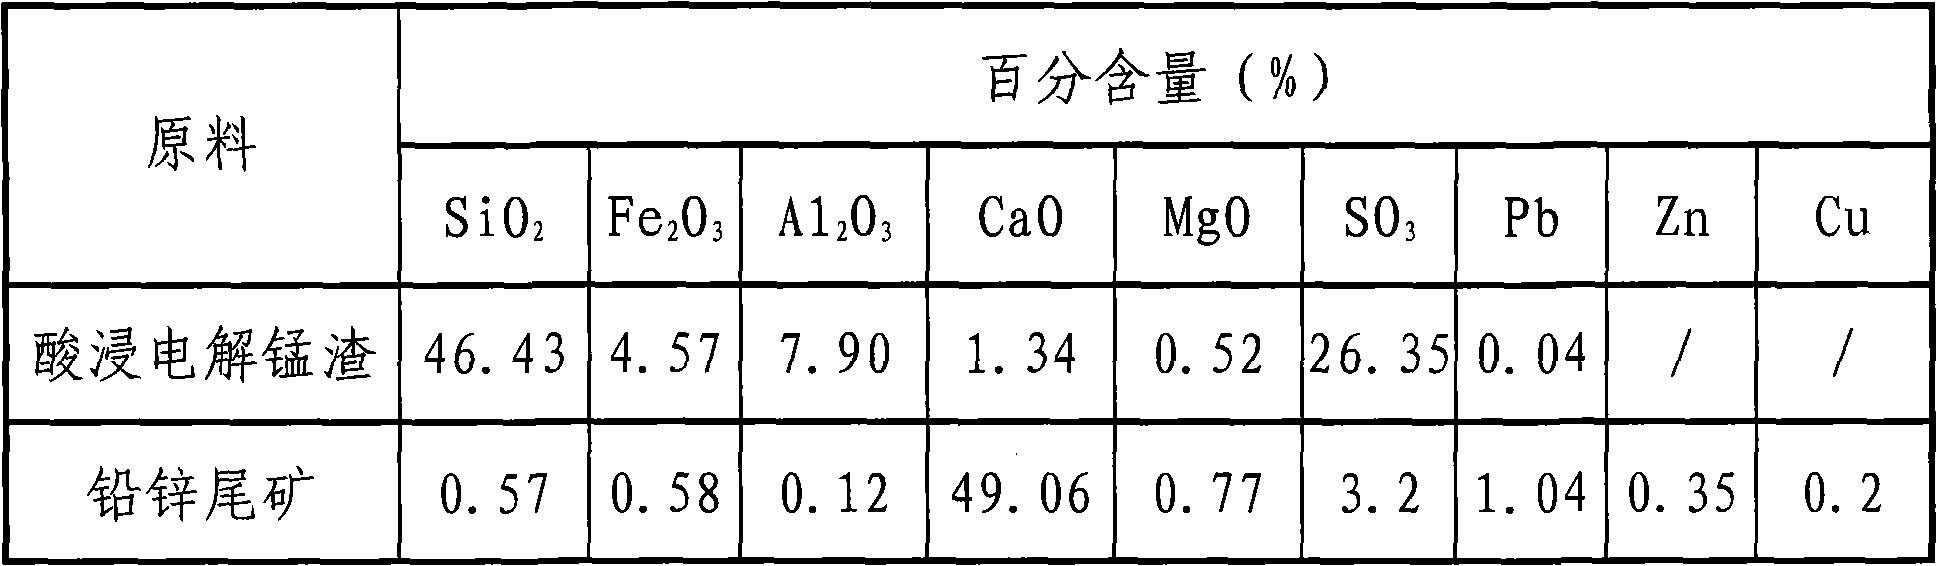 Method for co-producing cement, sulfuric acid and gypsum by using lead-zinc tailings and acid-leaching electrolytic manganese residues as main raw materials